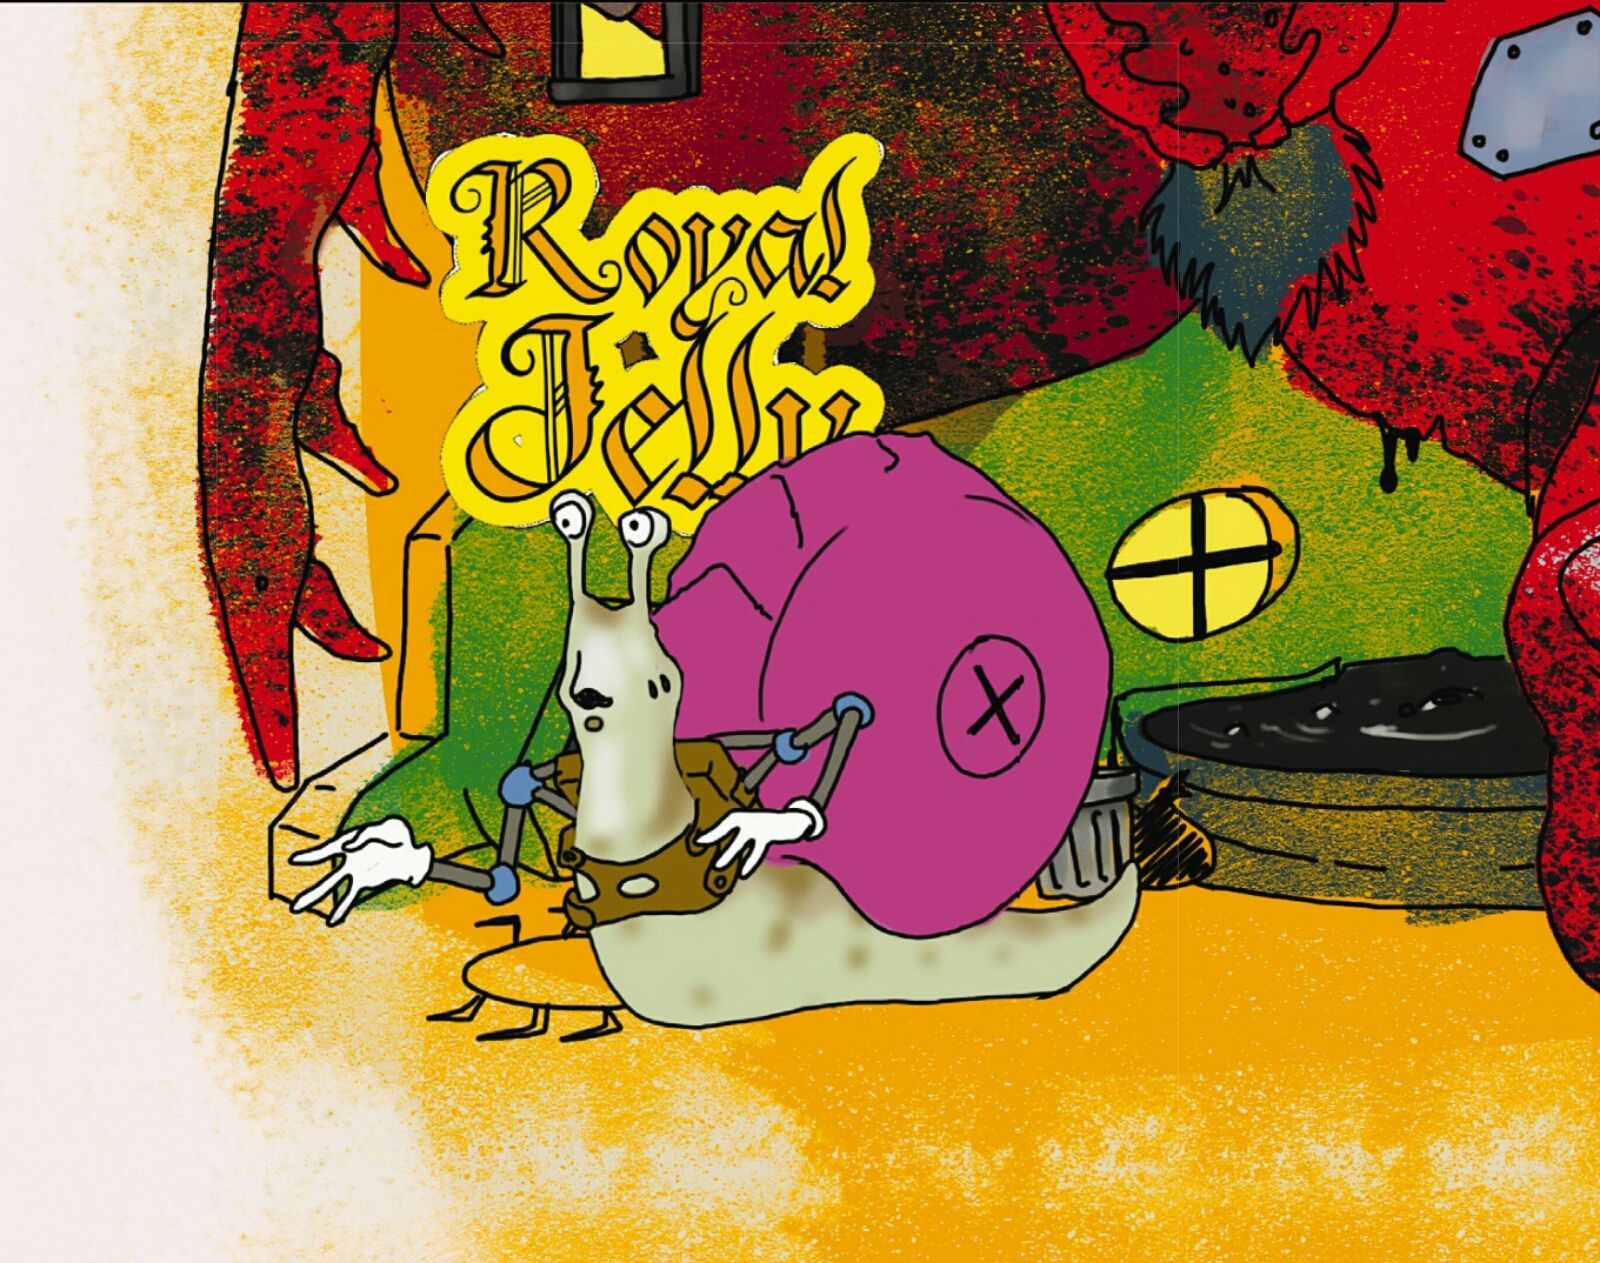 A giant snail with robot arms is the proprietor of “The Royal Jelly.”